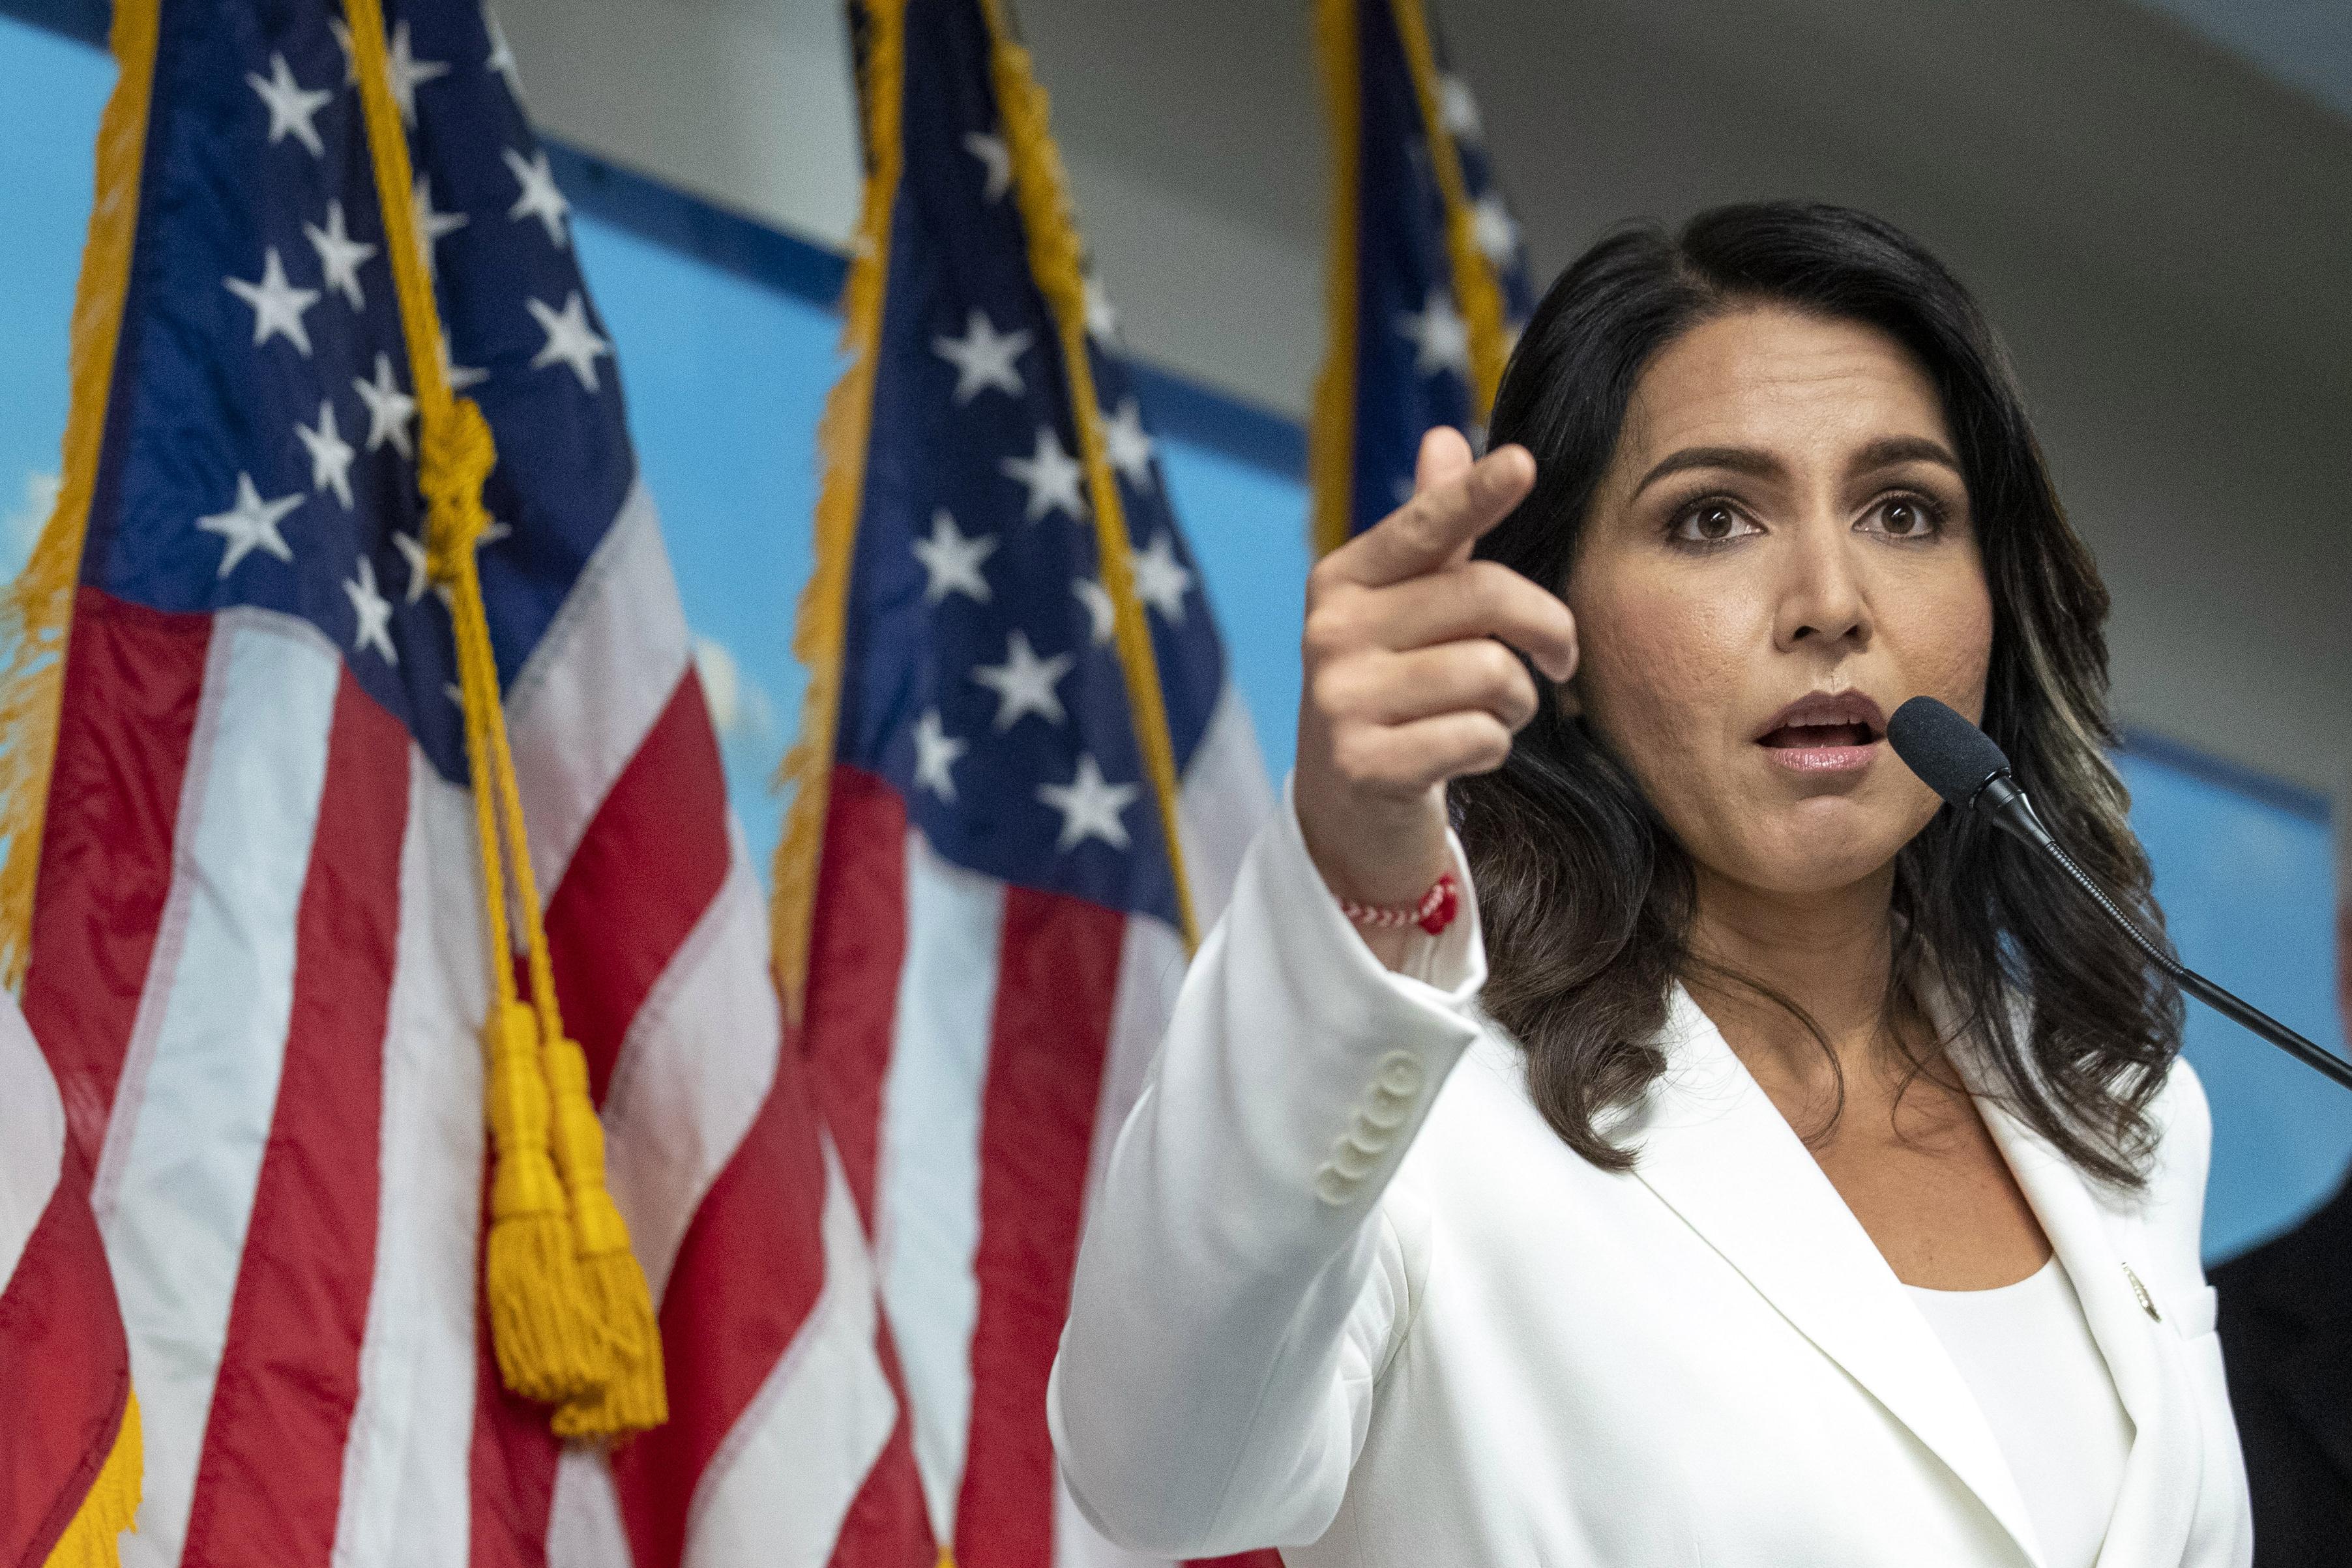 Tulsi Gabbard, 2020 candidate, defends frequent Fox News appearances -  Washington Times